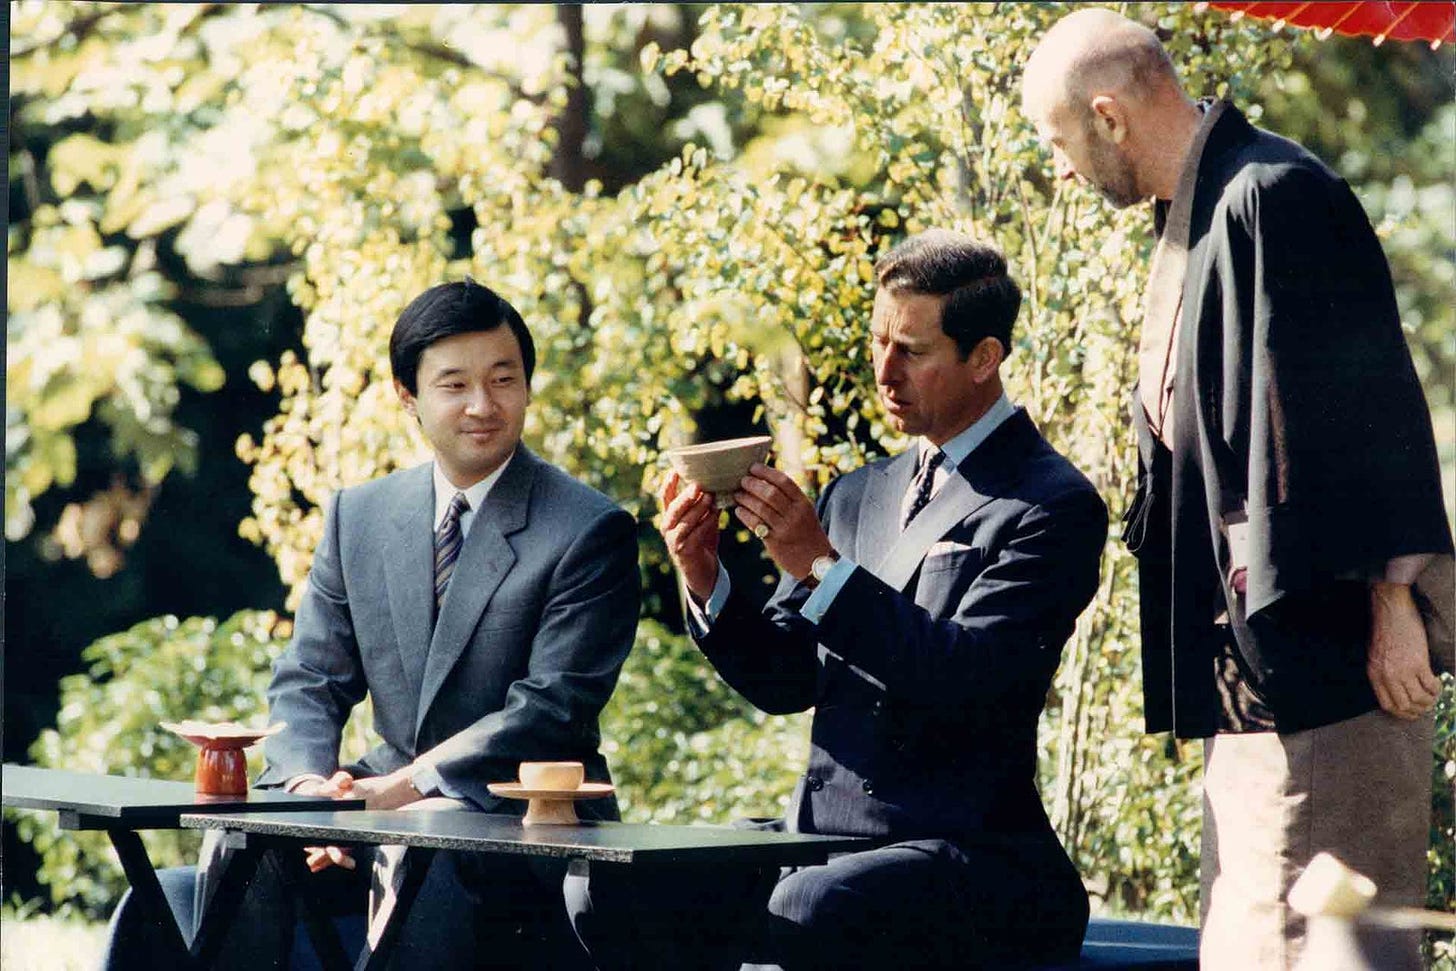 Emperor Naruhito  and Prince Charles taking part in a tea ceremony in the Kyoto gardens 1991